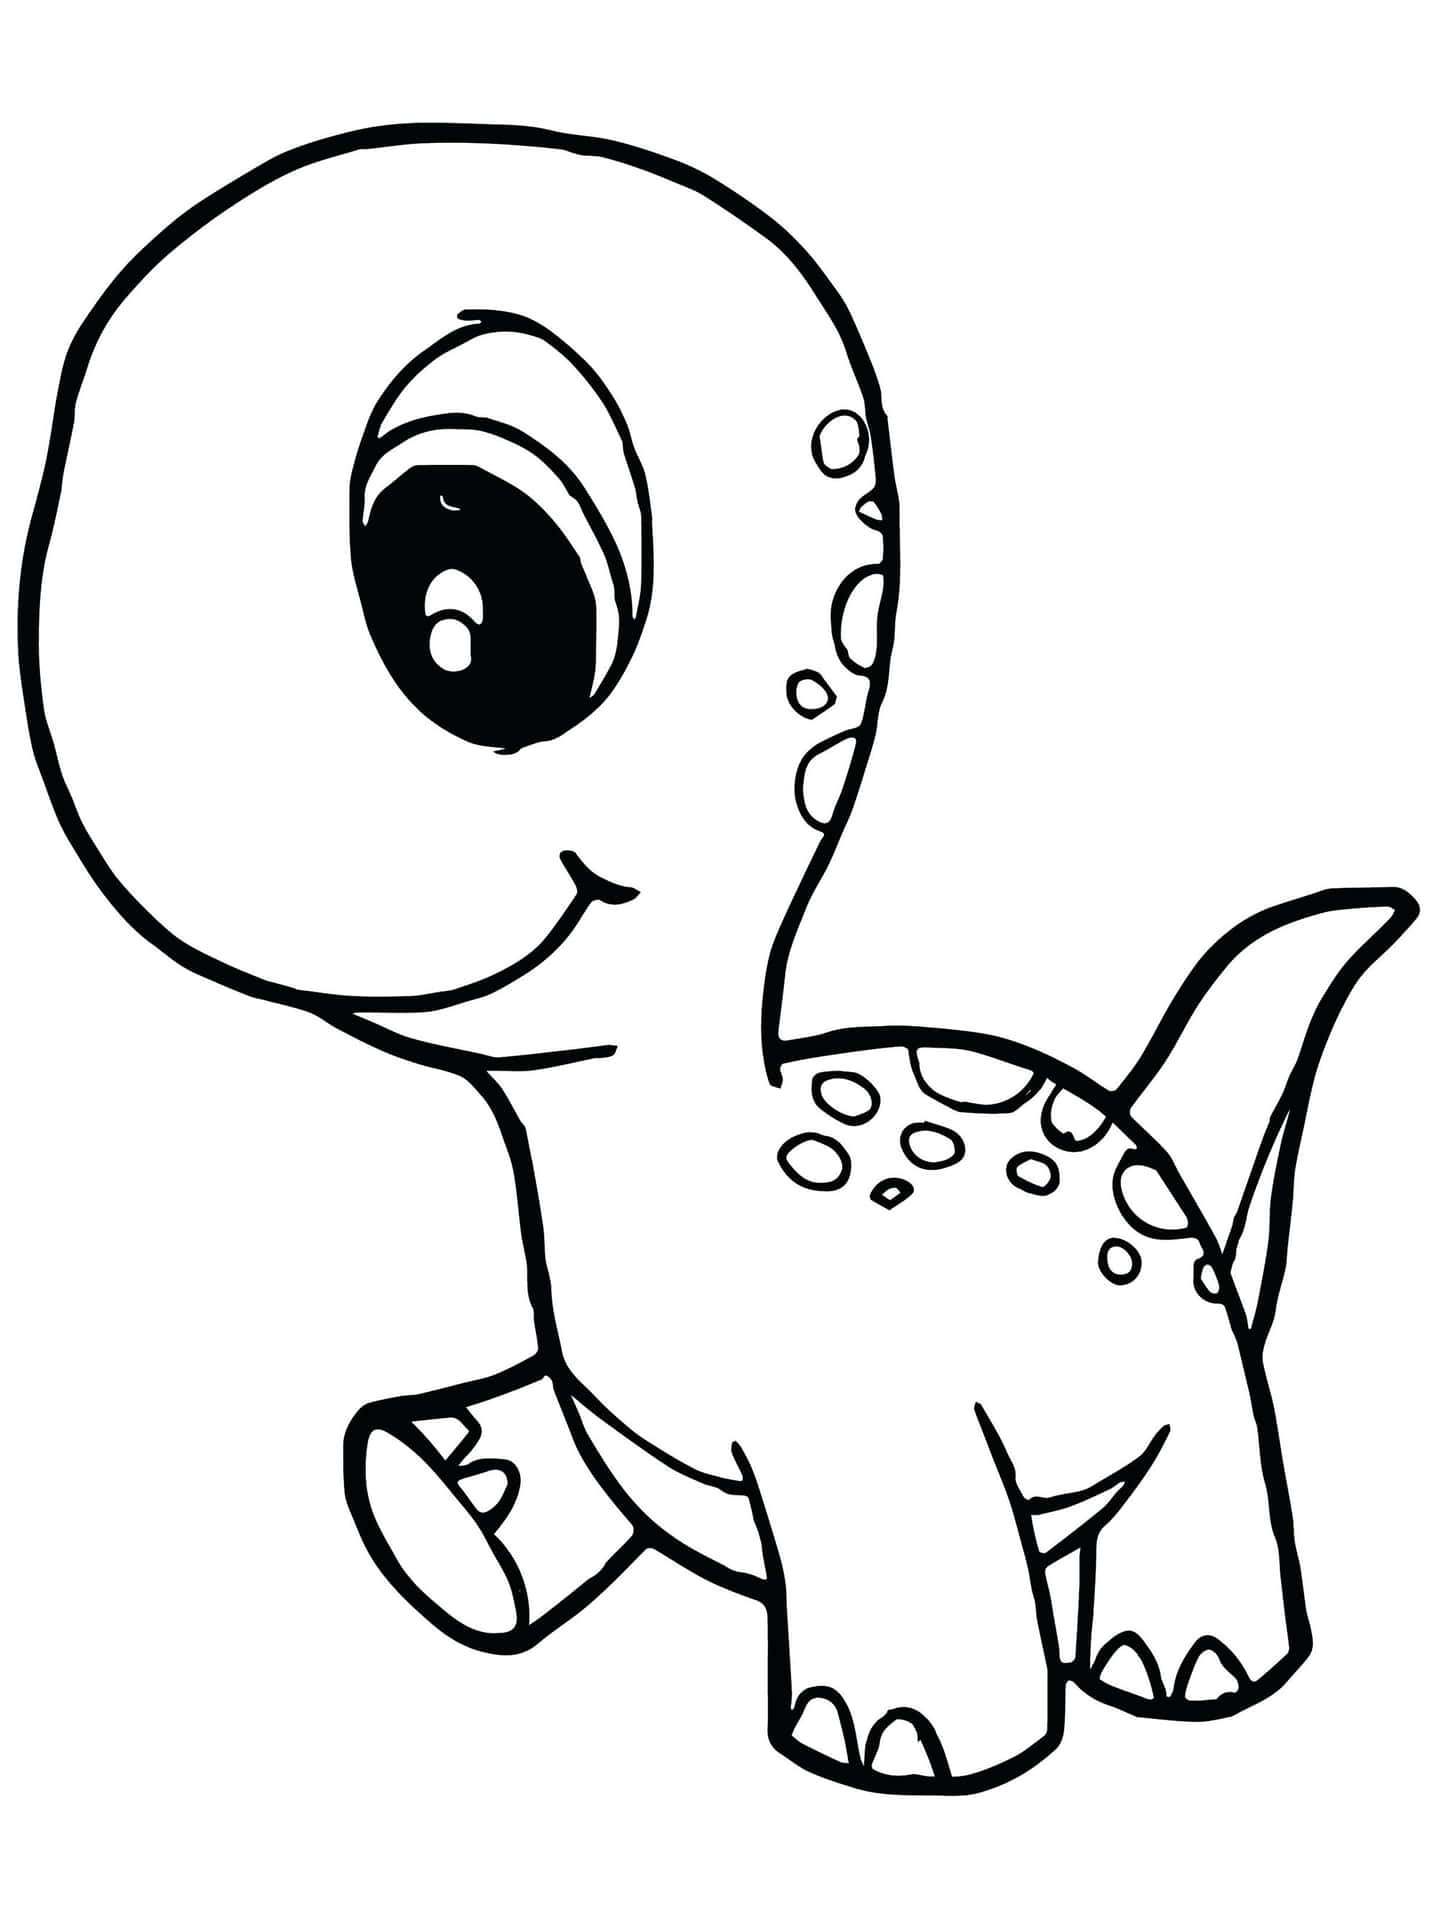 A Baby Dinosaur Coloring Page